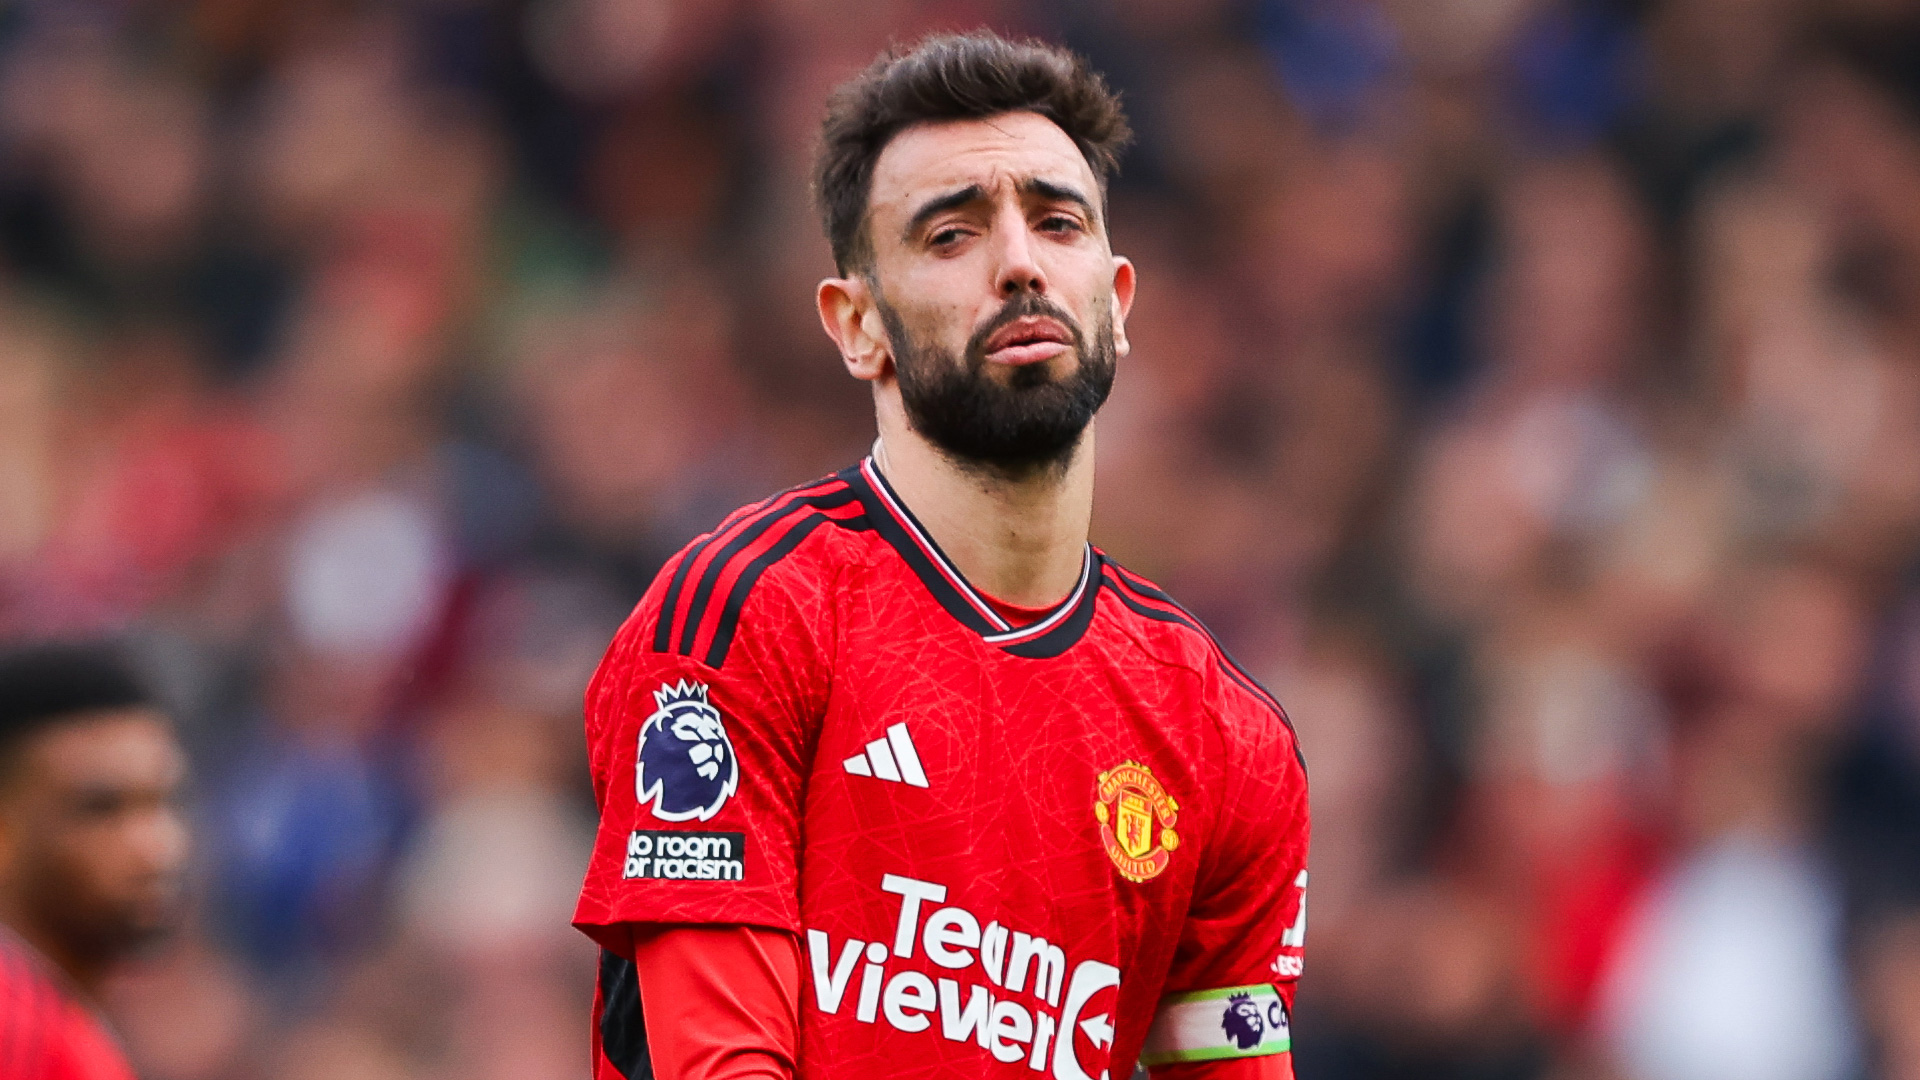 Man Utd captain Bruno Fernandes drops big hint he could QUIT this summer in shock TV interview [Video]